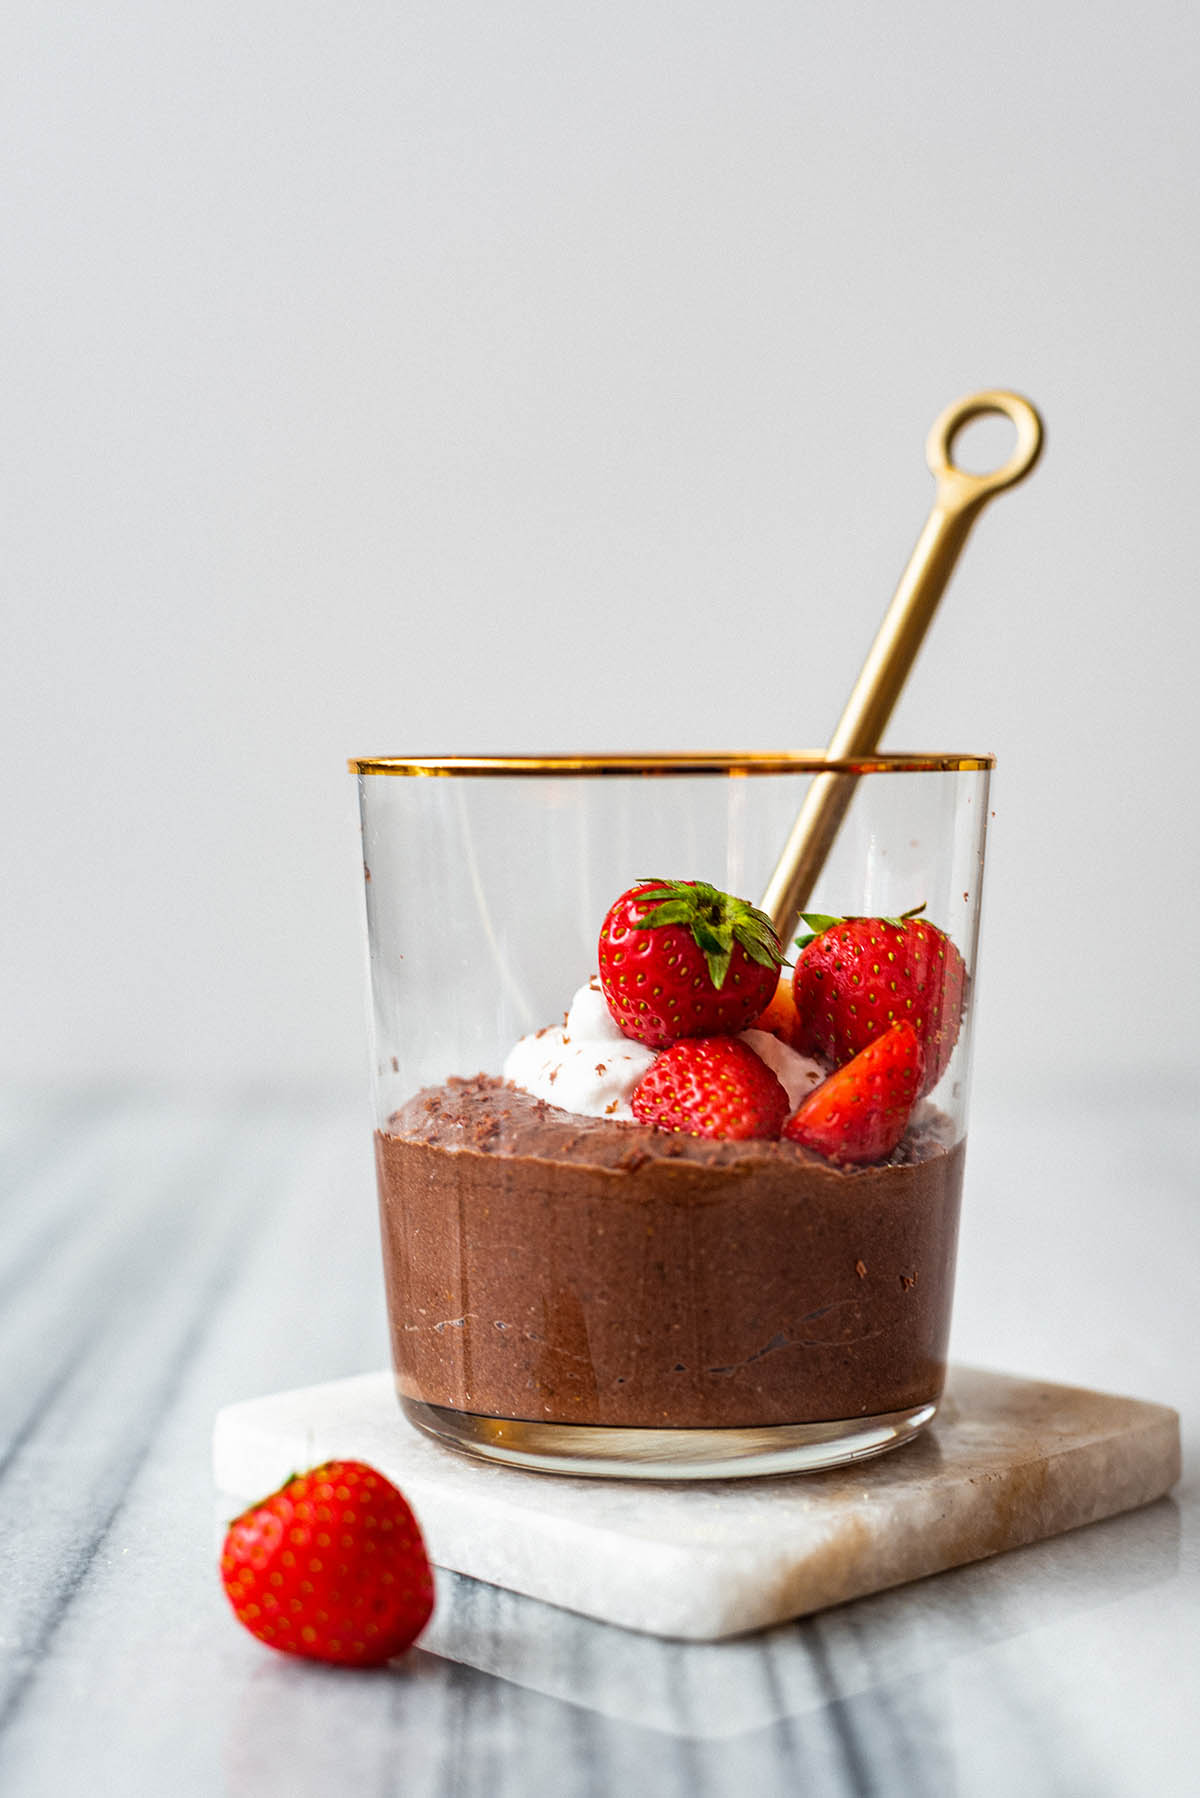 Chocolate chia mousse in a glass with whipped cream and strawberries.